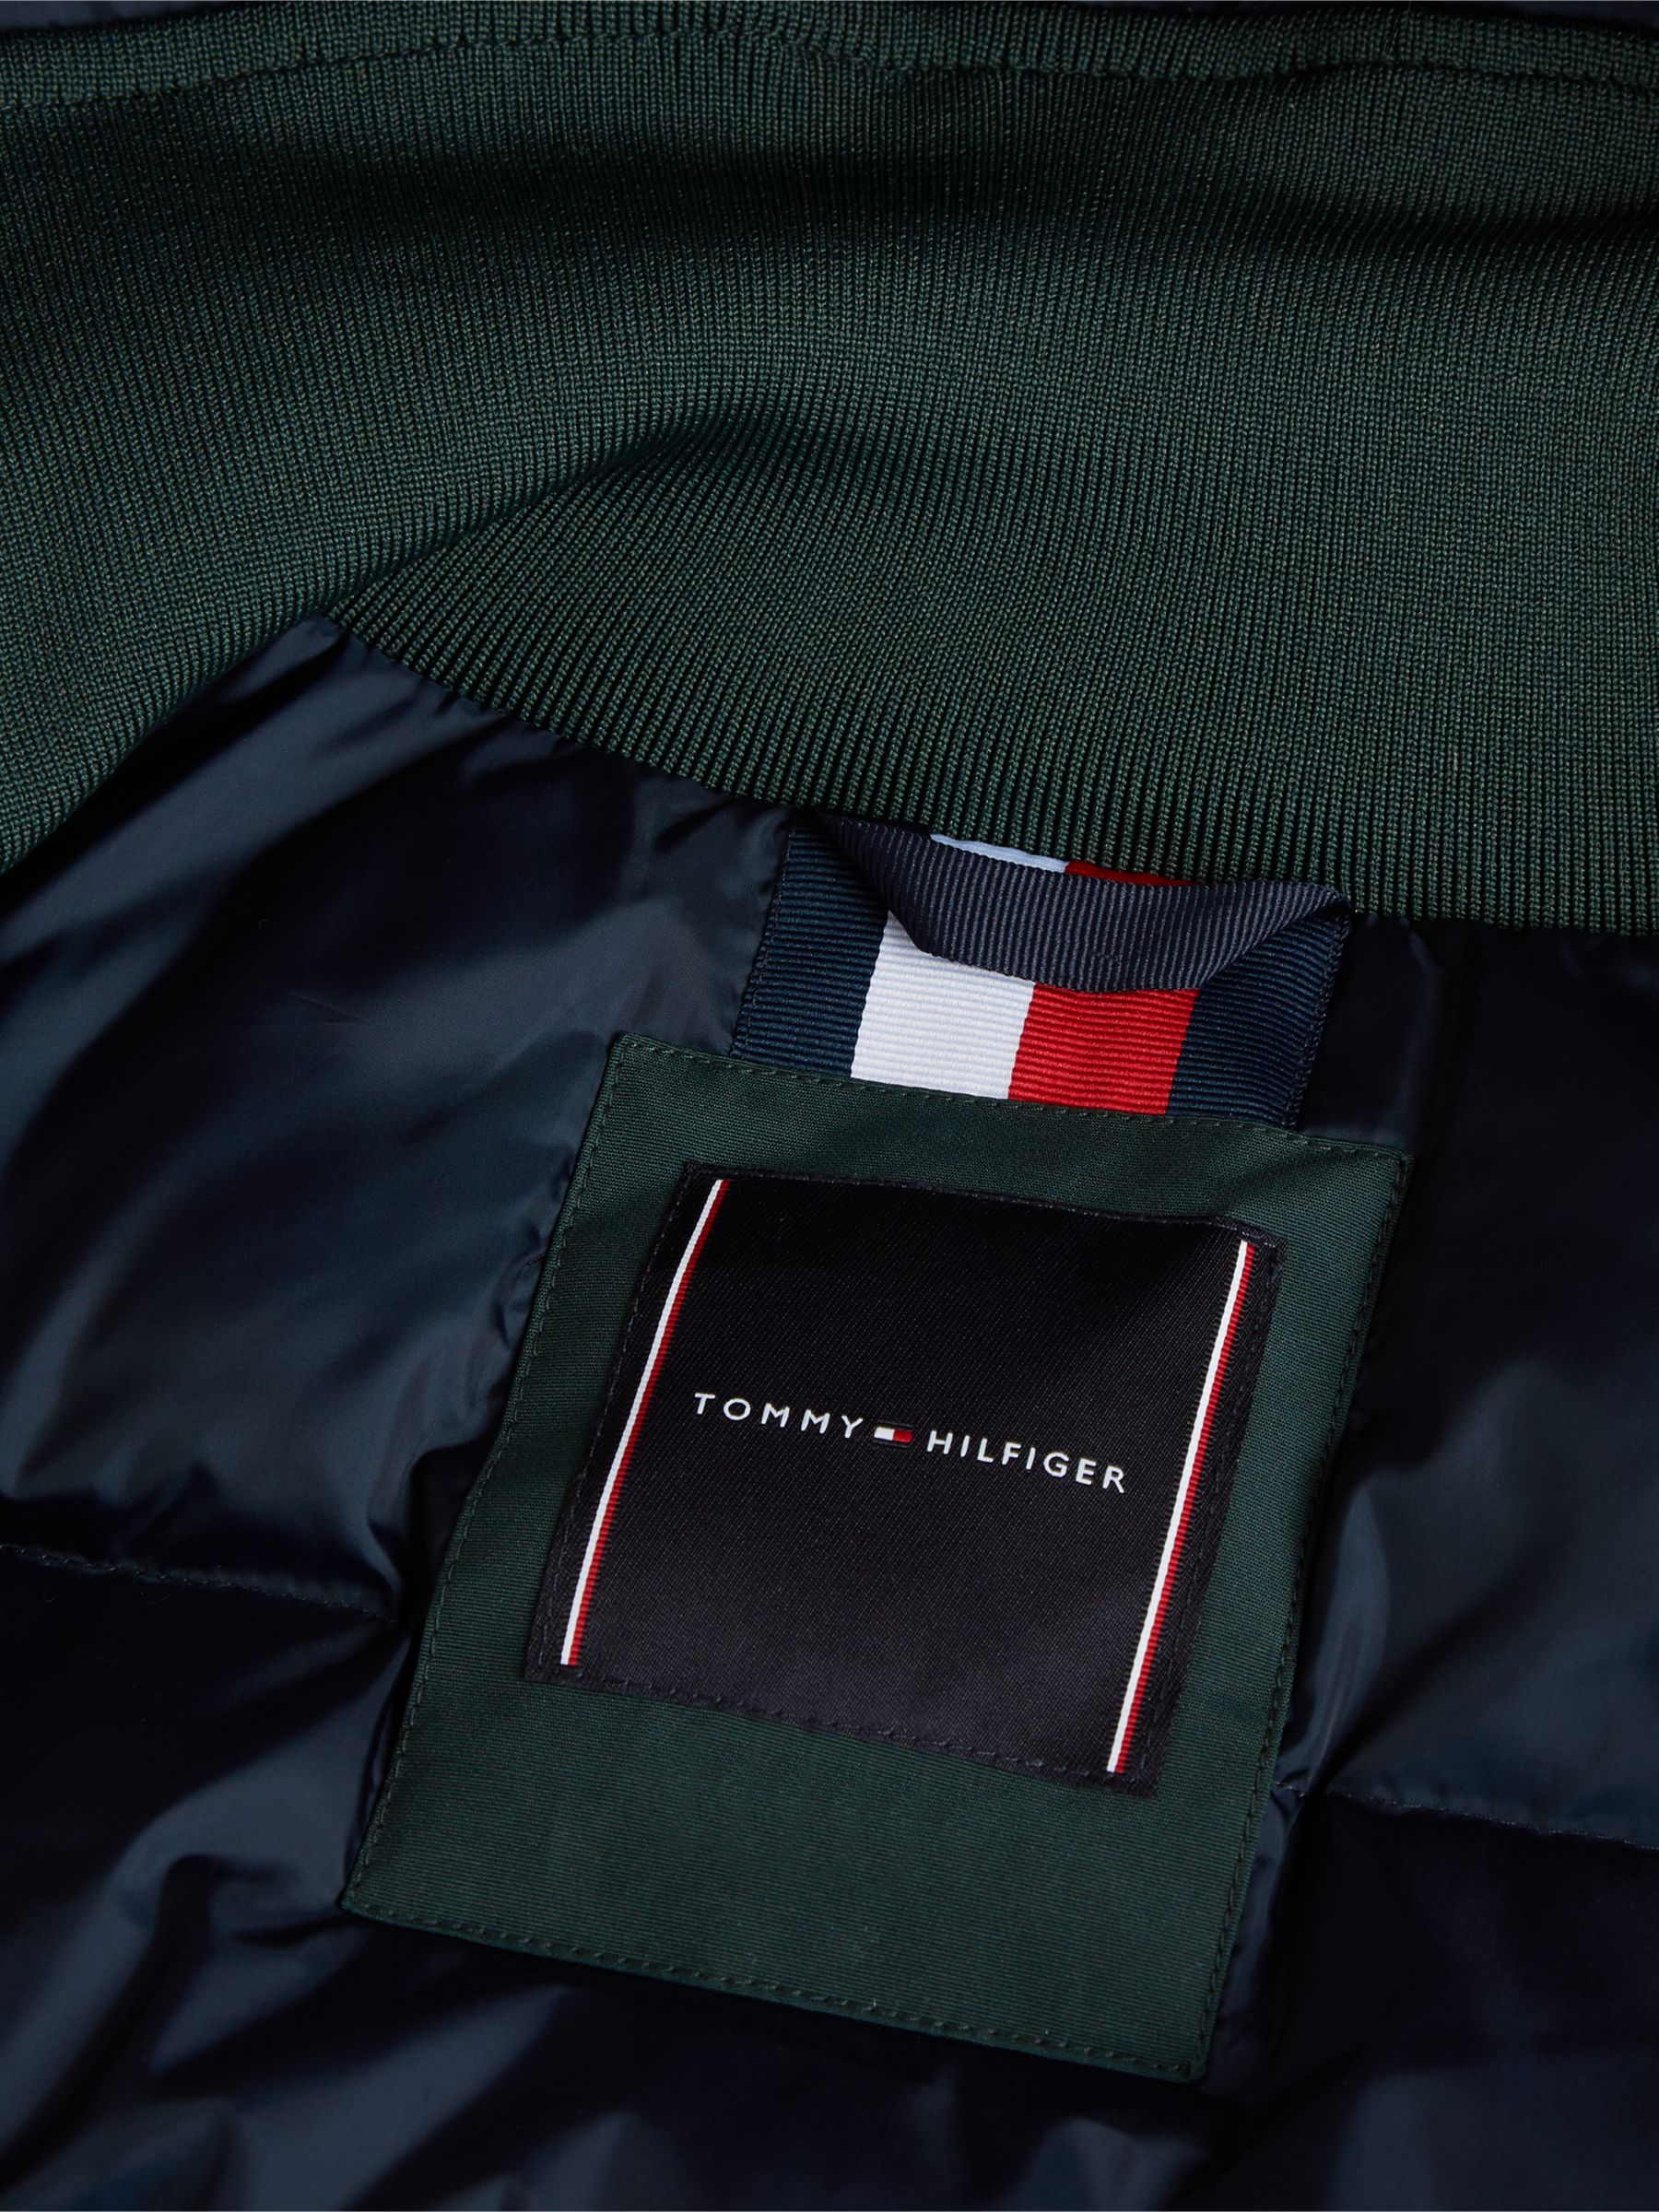 down feather tommy hilfiger